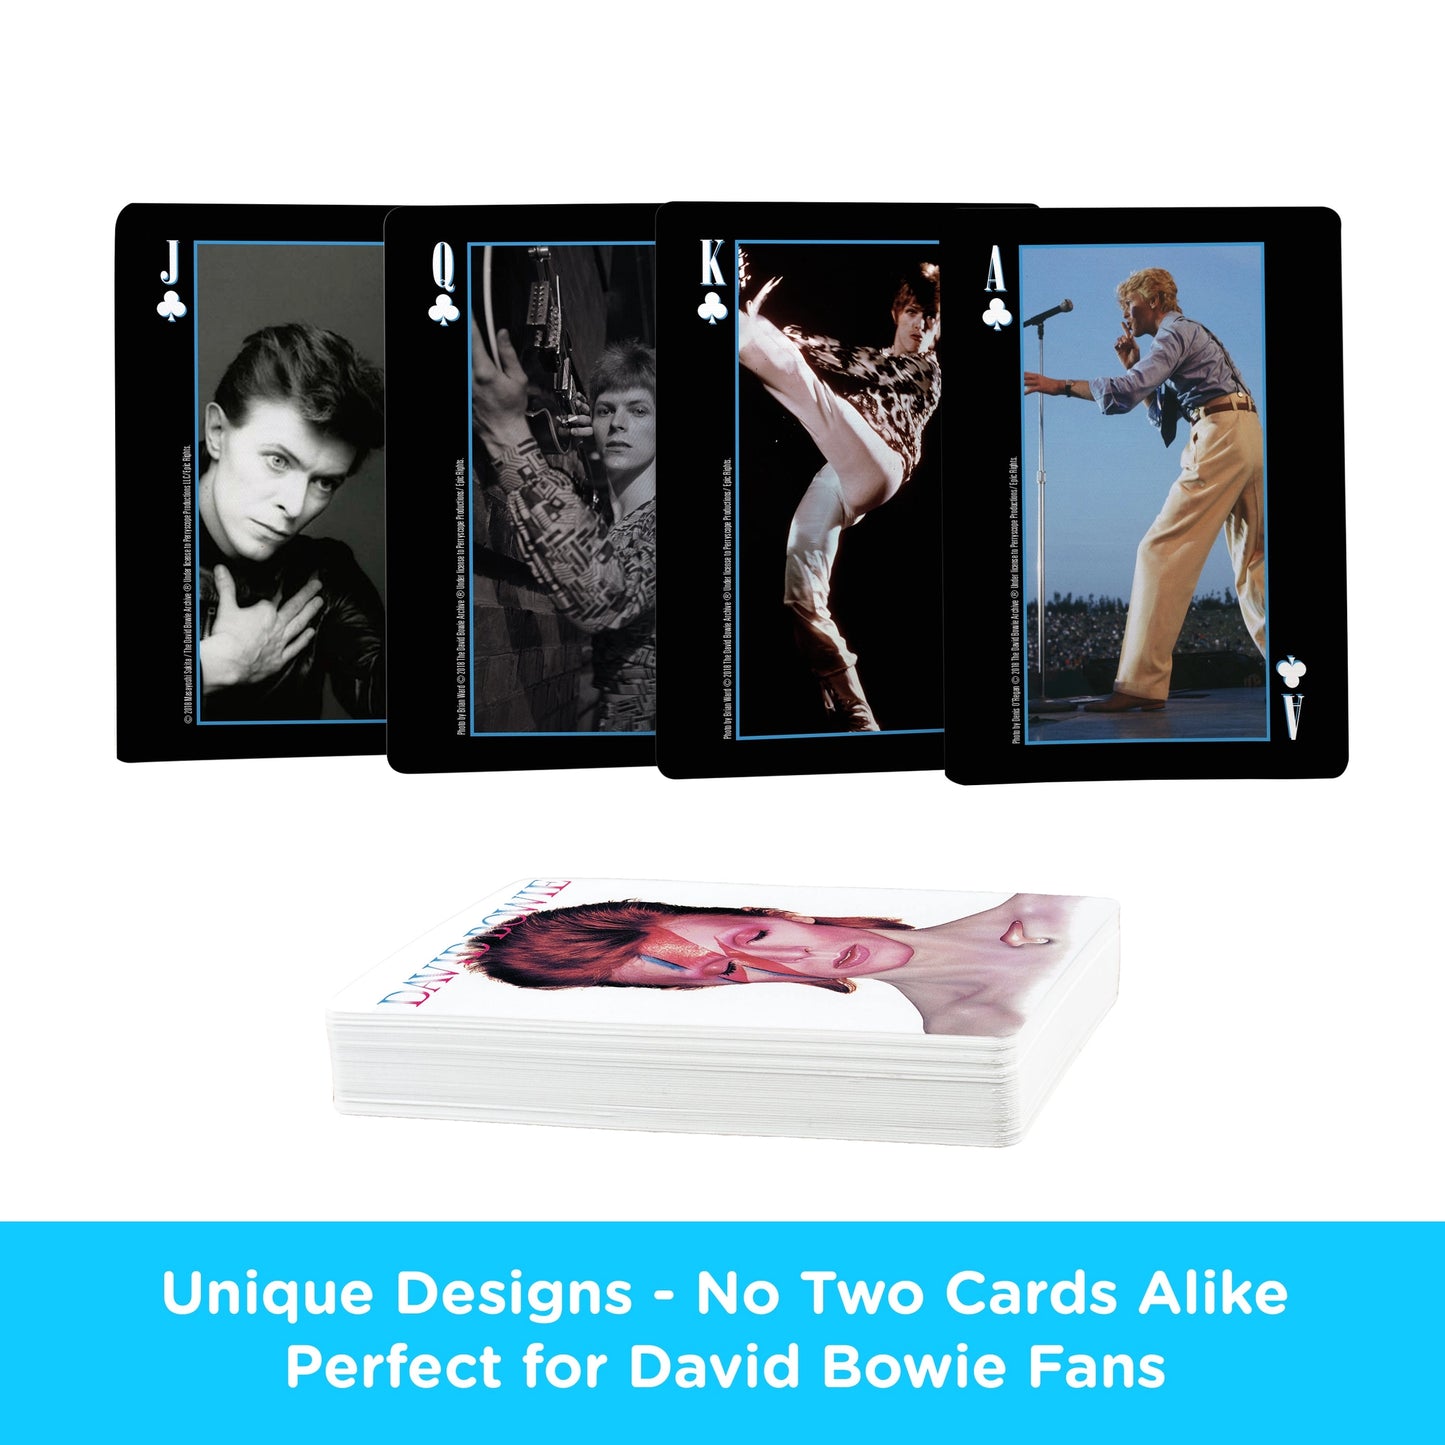 David Bowie Playing Cards by Aquarius - A Tribute to the Iconic Star